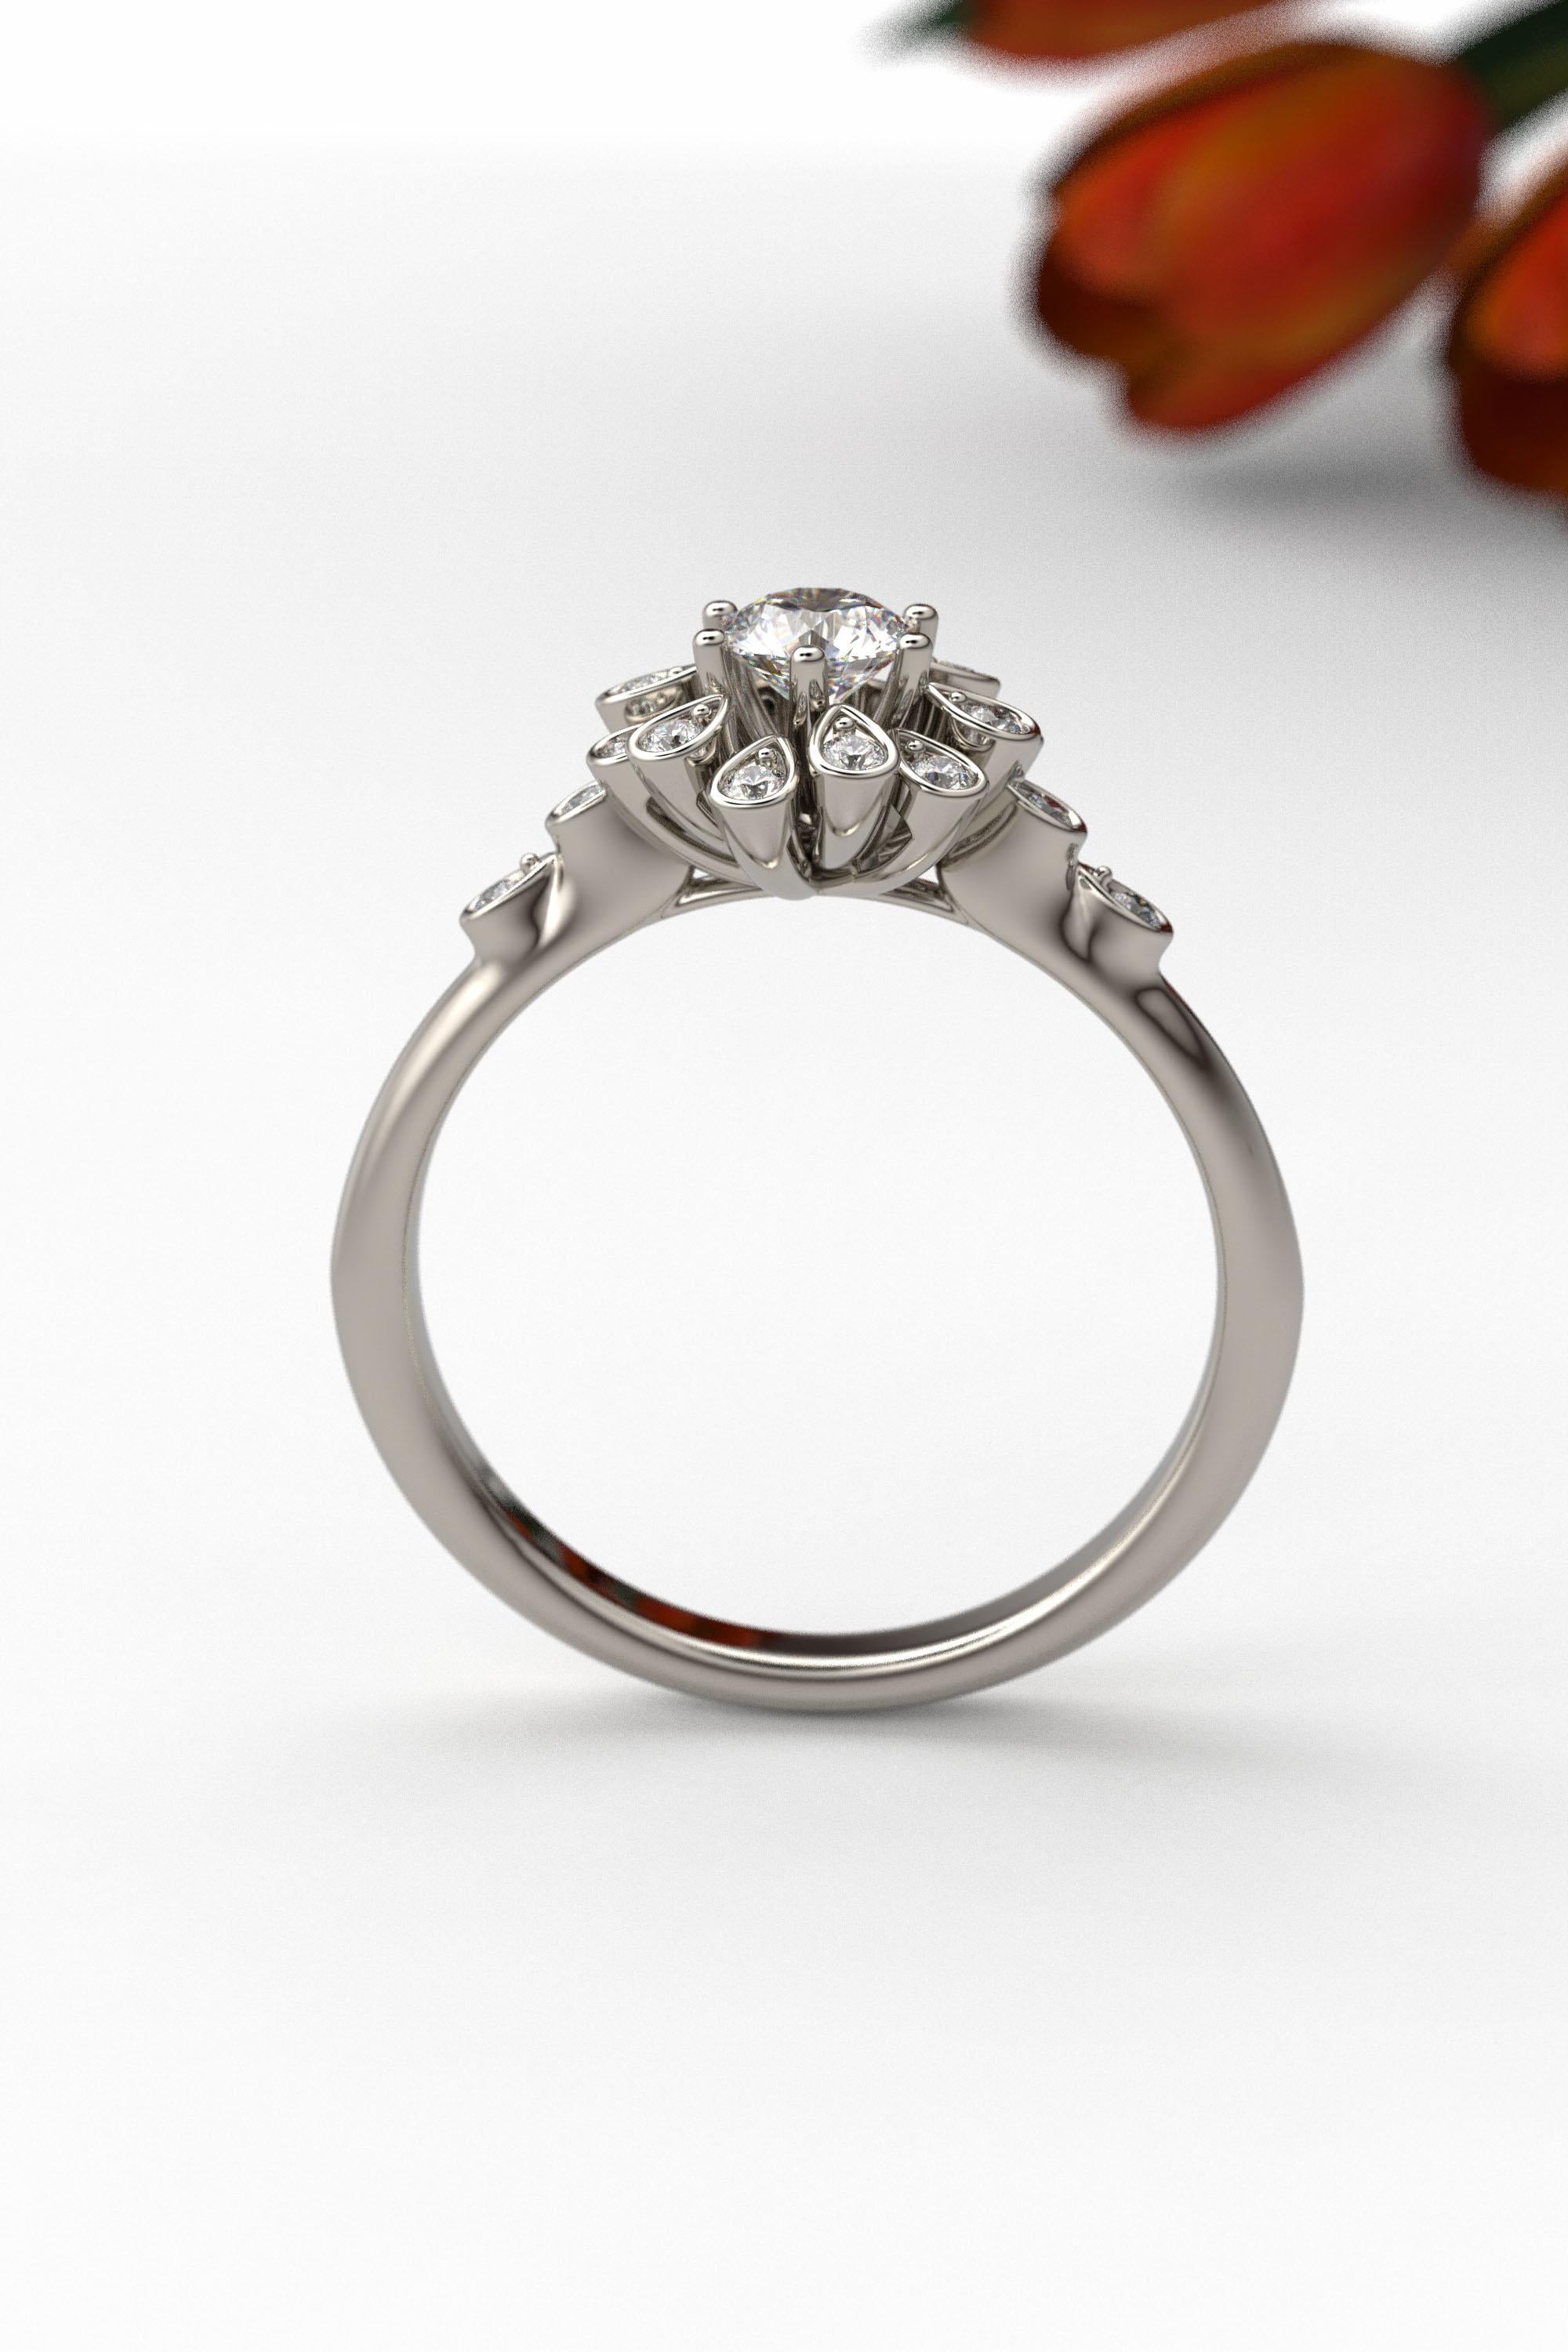 For Sale:  18k Halo Diamond Engagement Ring with 0.32 Carat GIA Certified Center Diamond 7